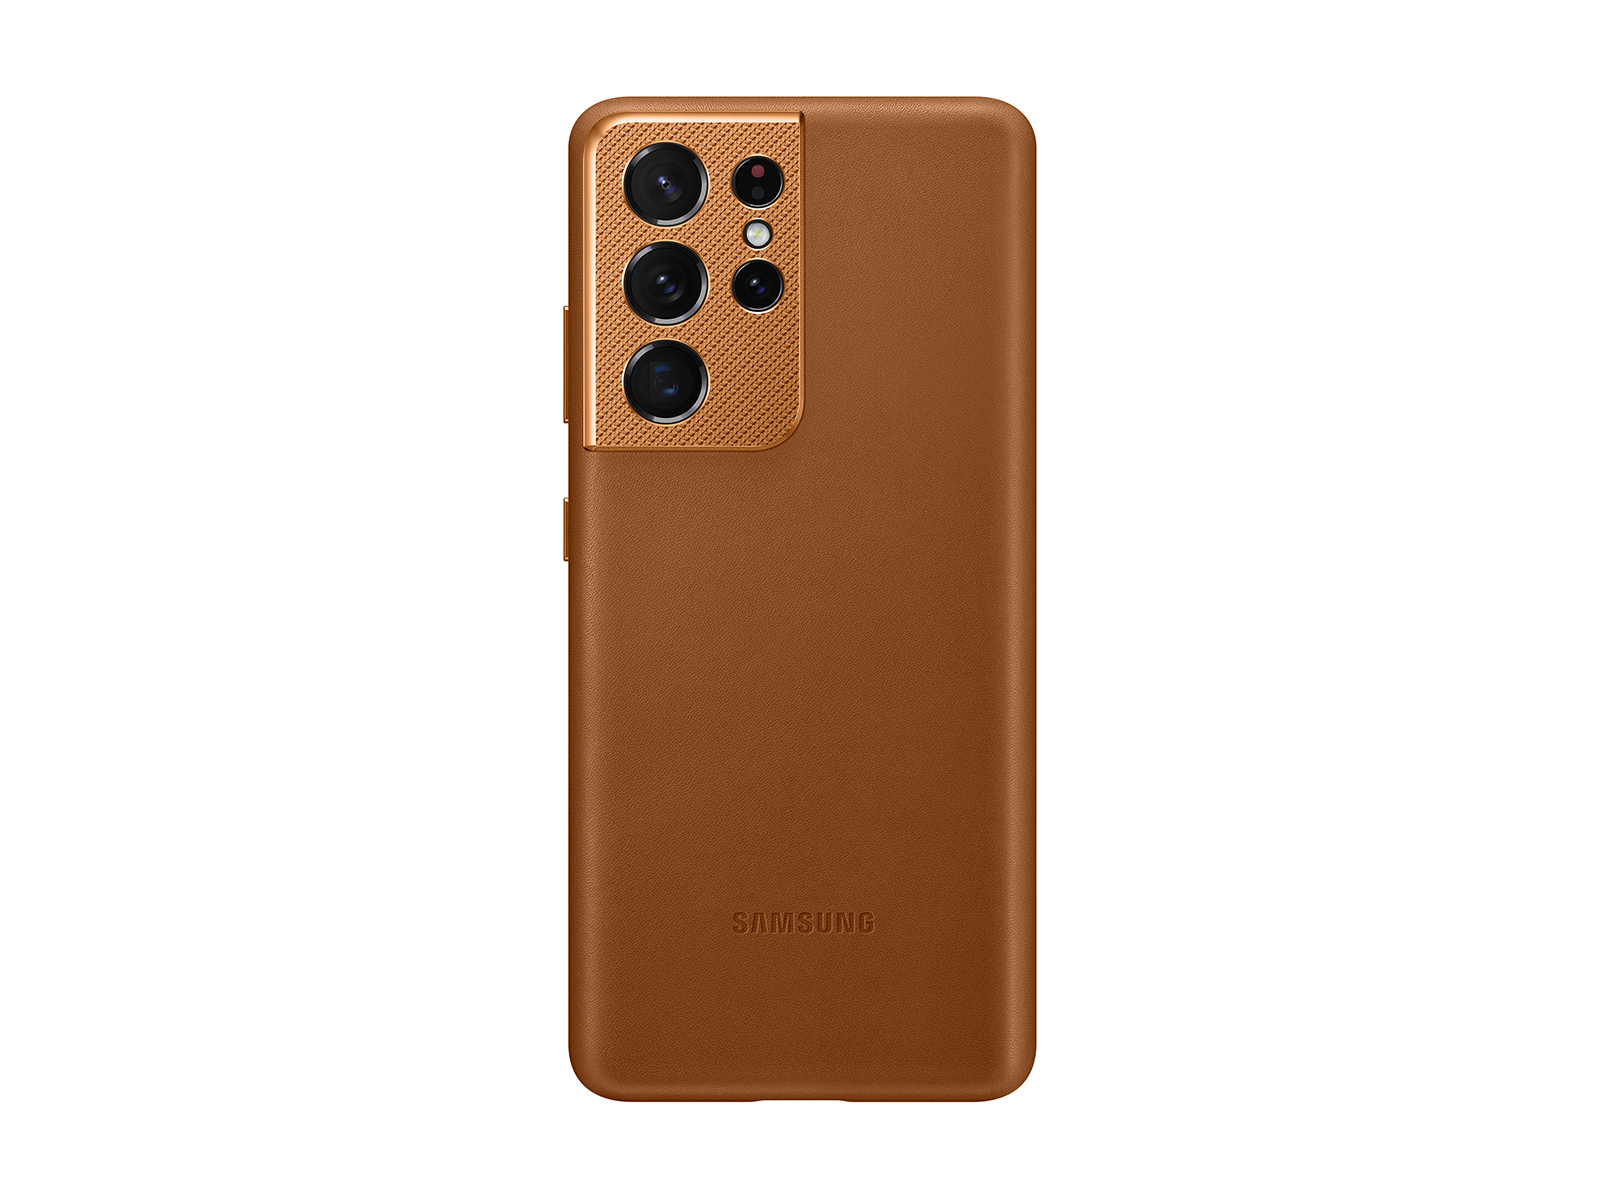 Thumbnail image of Galaxy S21 Ultra 5G Leather Cover, Brown